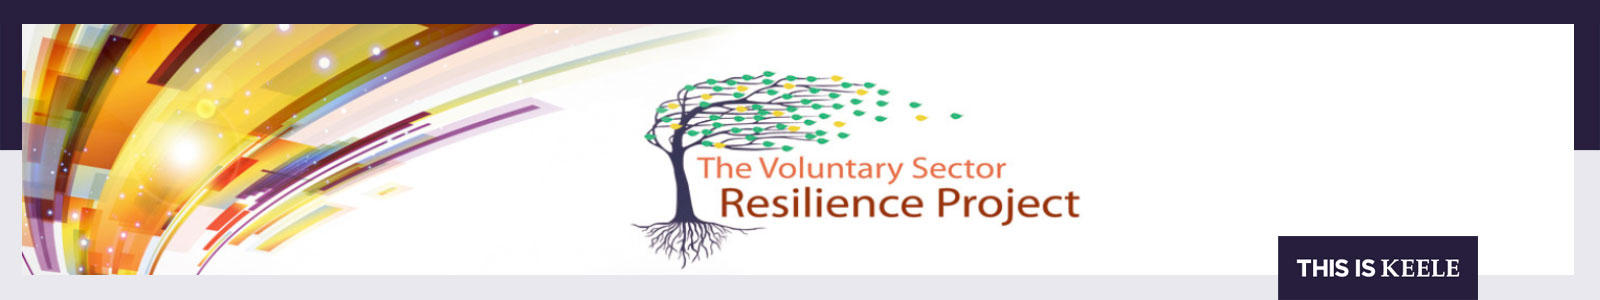 The Voluntary Sector Resilience Project banner